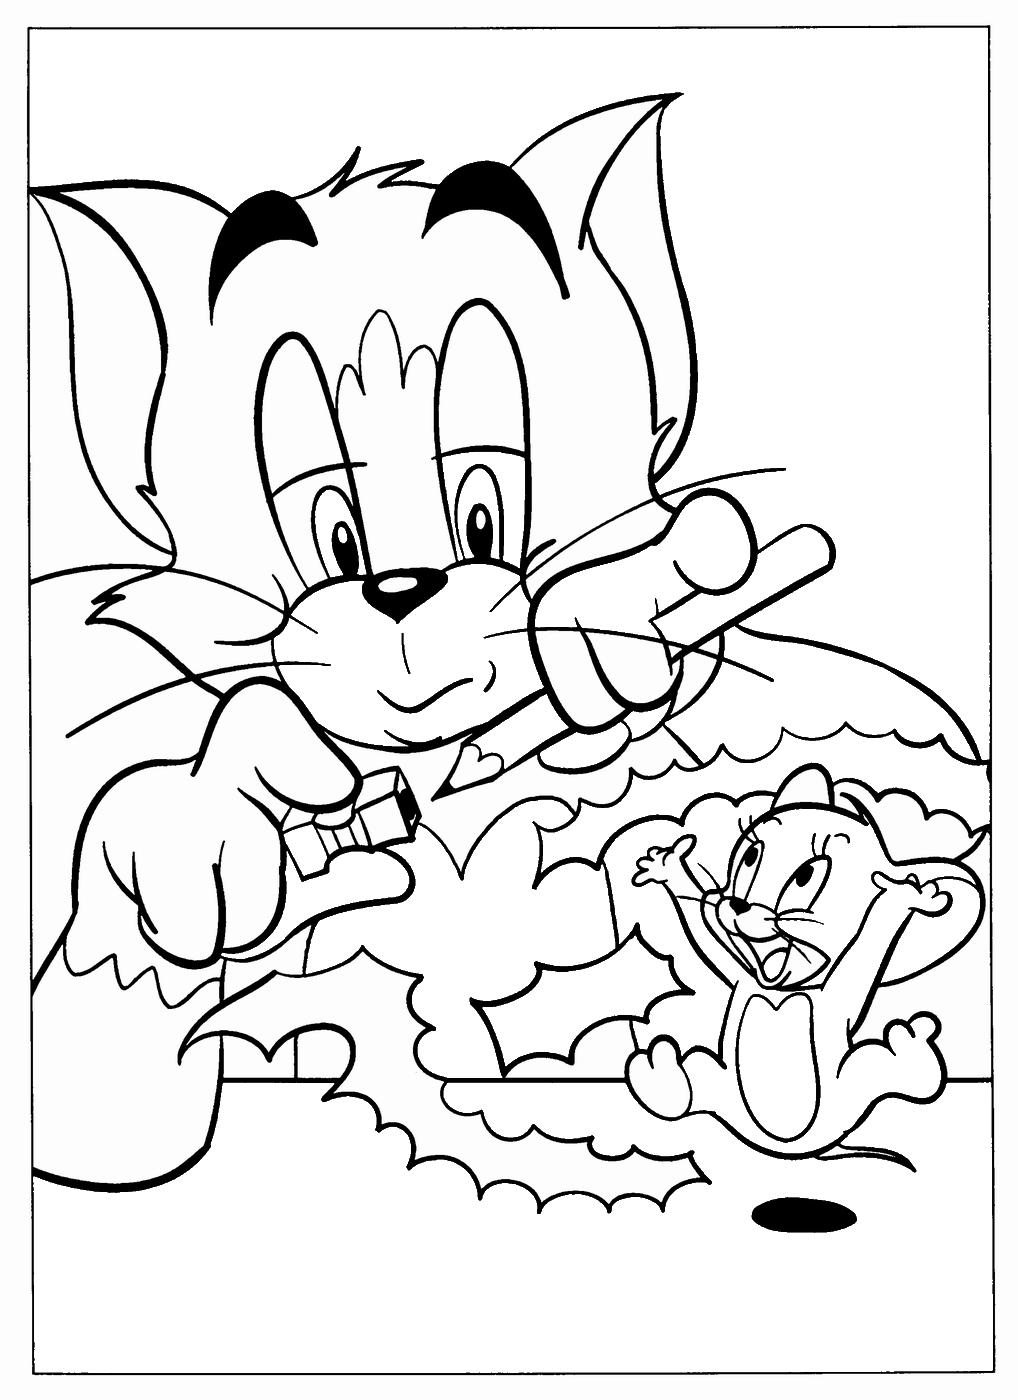 Tom and Jerry Coloring Pages TV Film tom_jerry_cl_21 Printable 2020 10151 Coloring4free